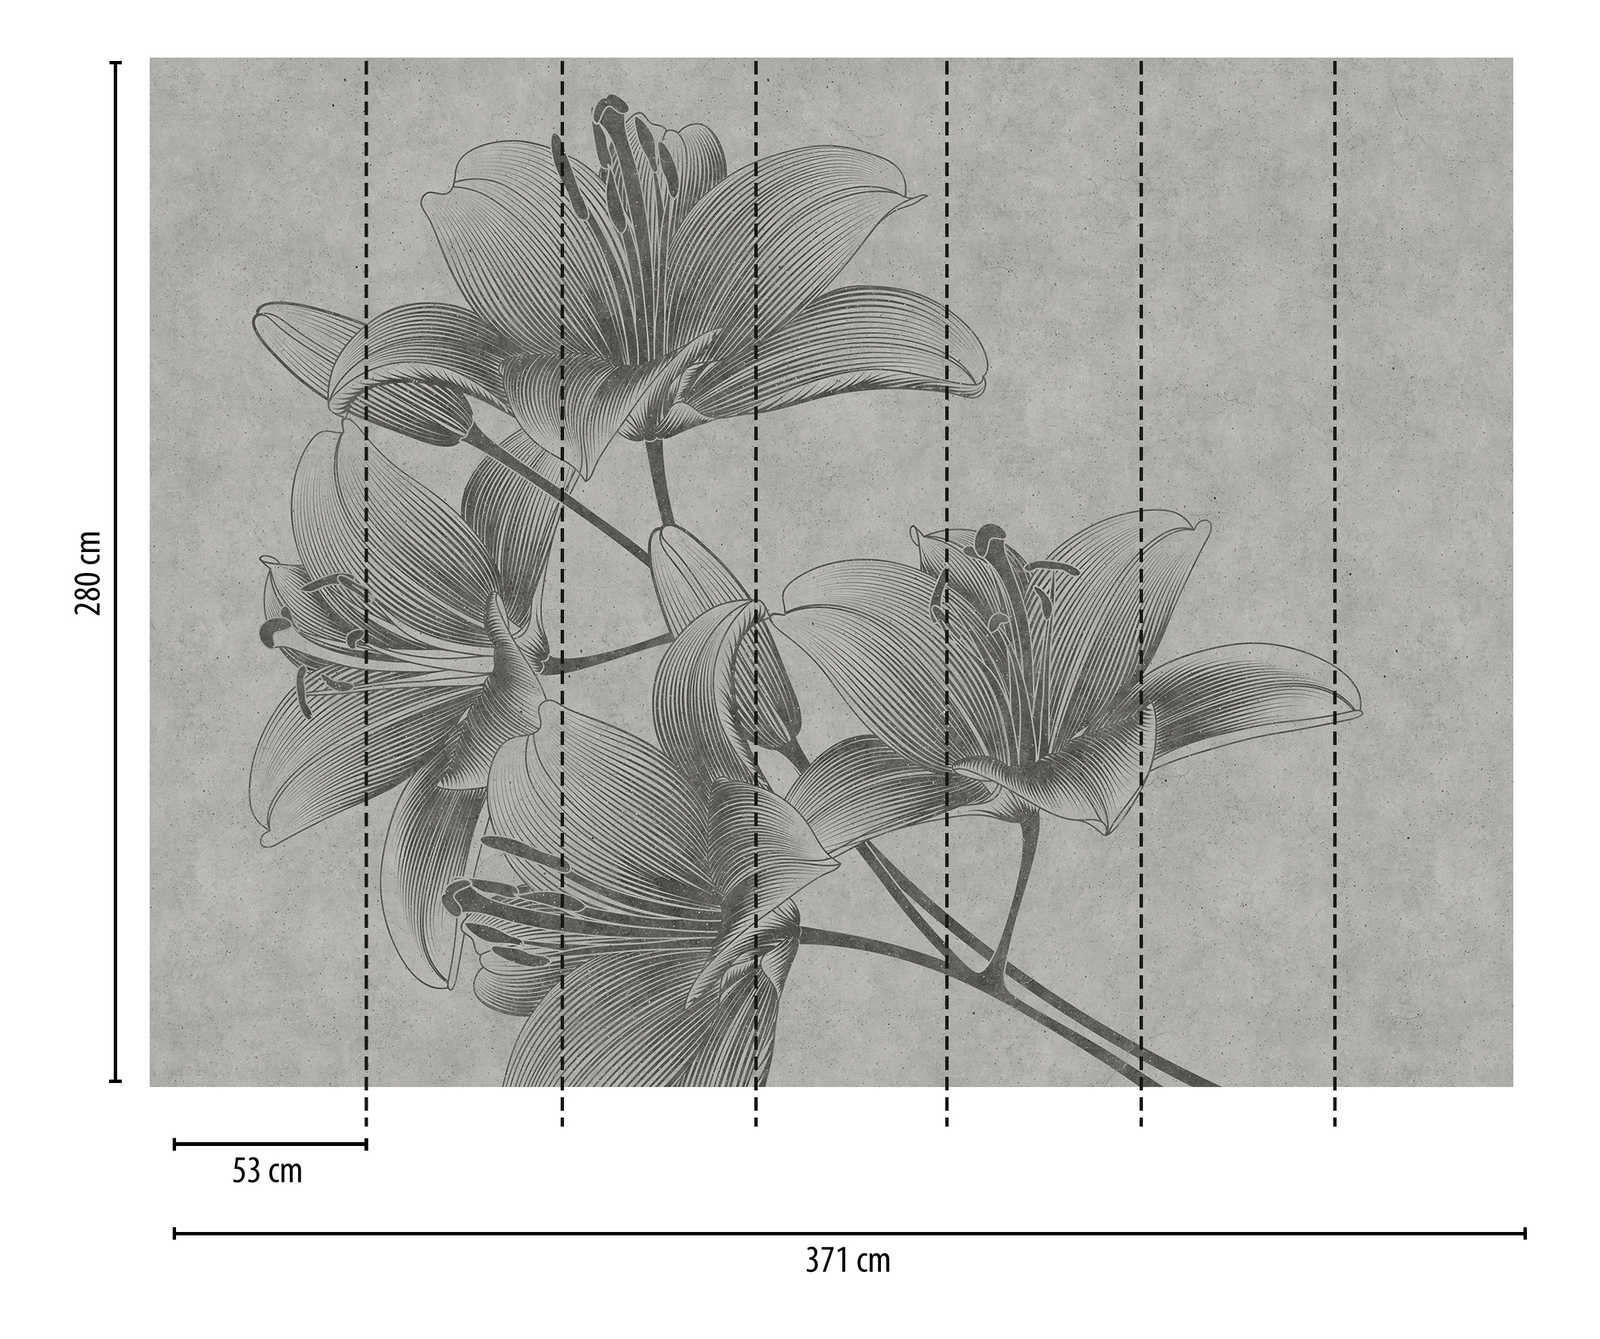             Wallpaper novelty | grey floral wallpaper lilies in line art style
        